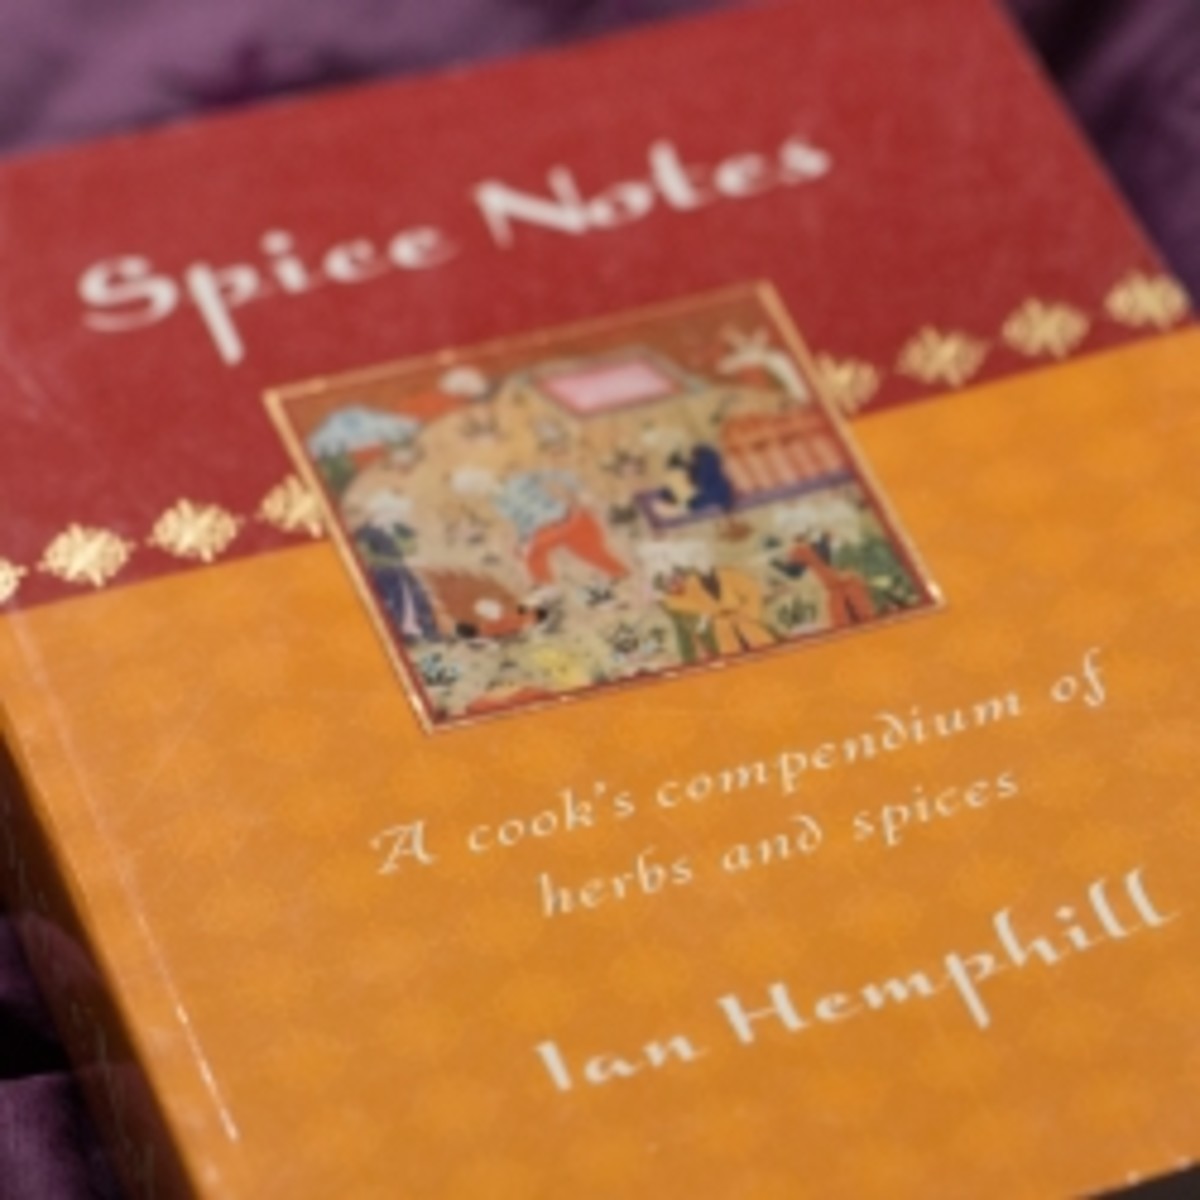 Spice Notes - my favorite herb and spice reference book.